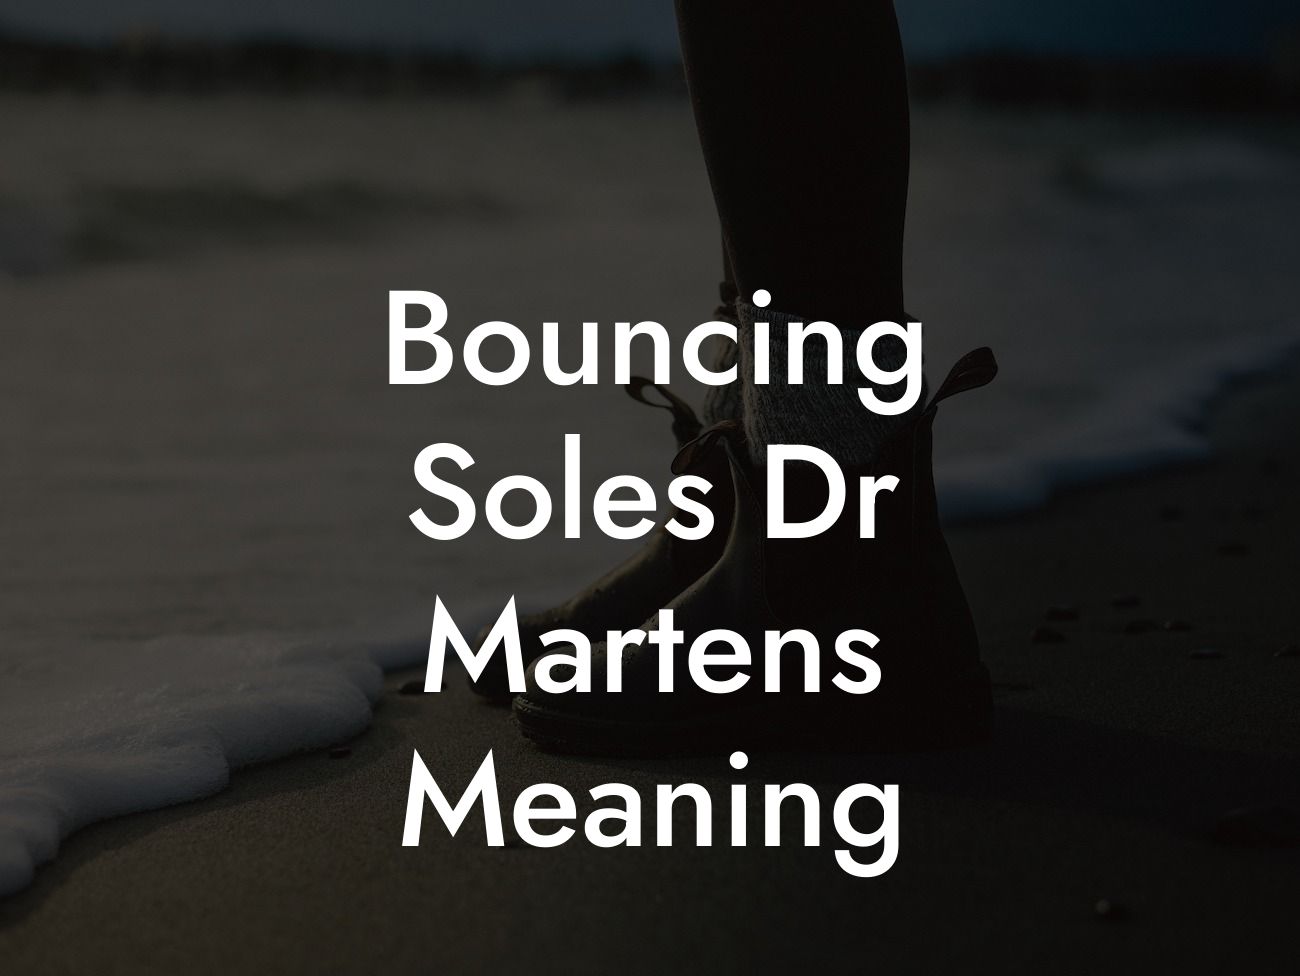 Bouncing Soles Dr Martens Meaning